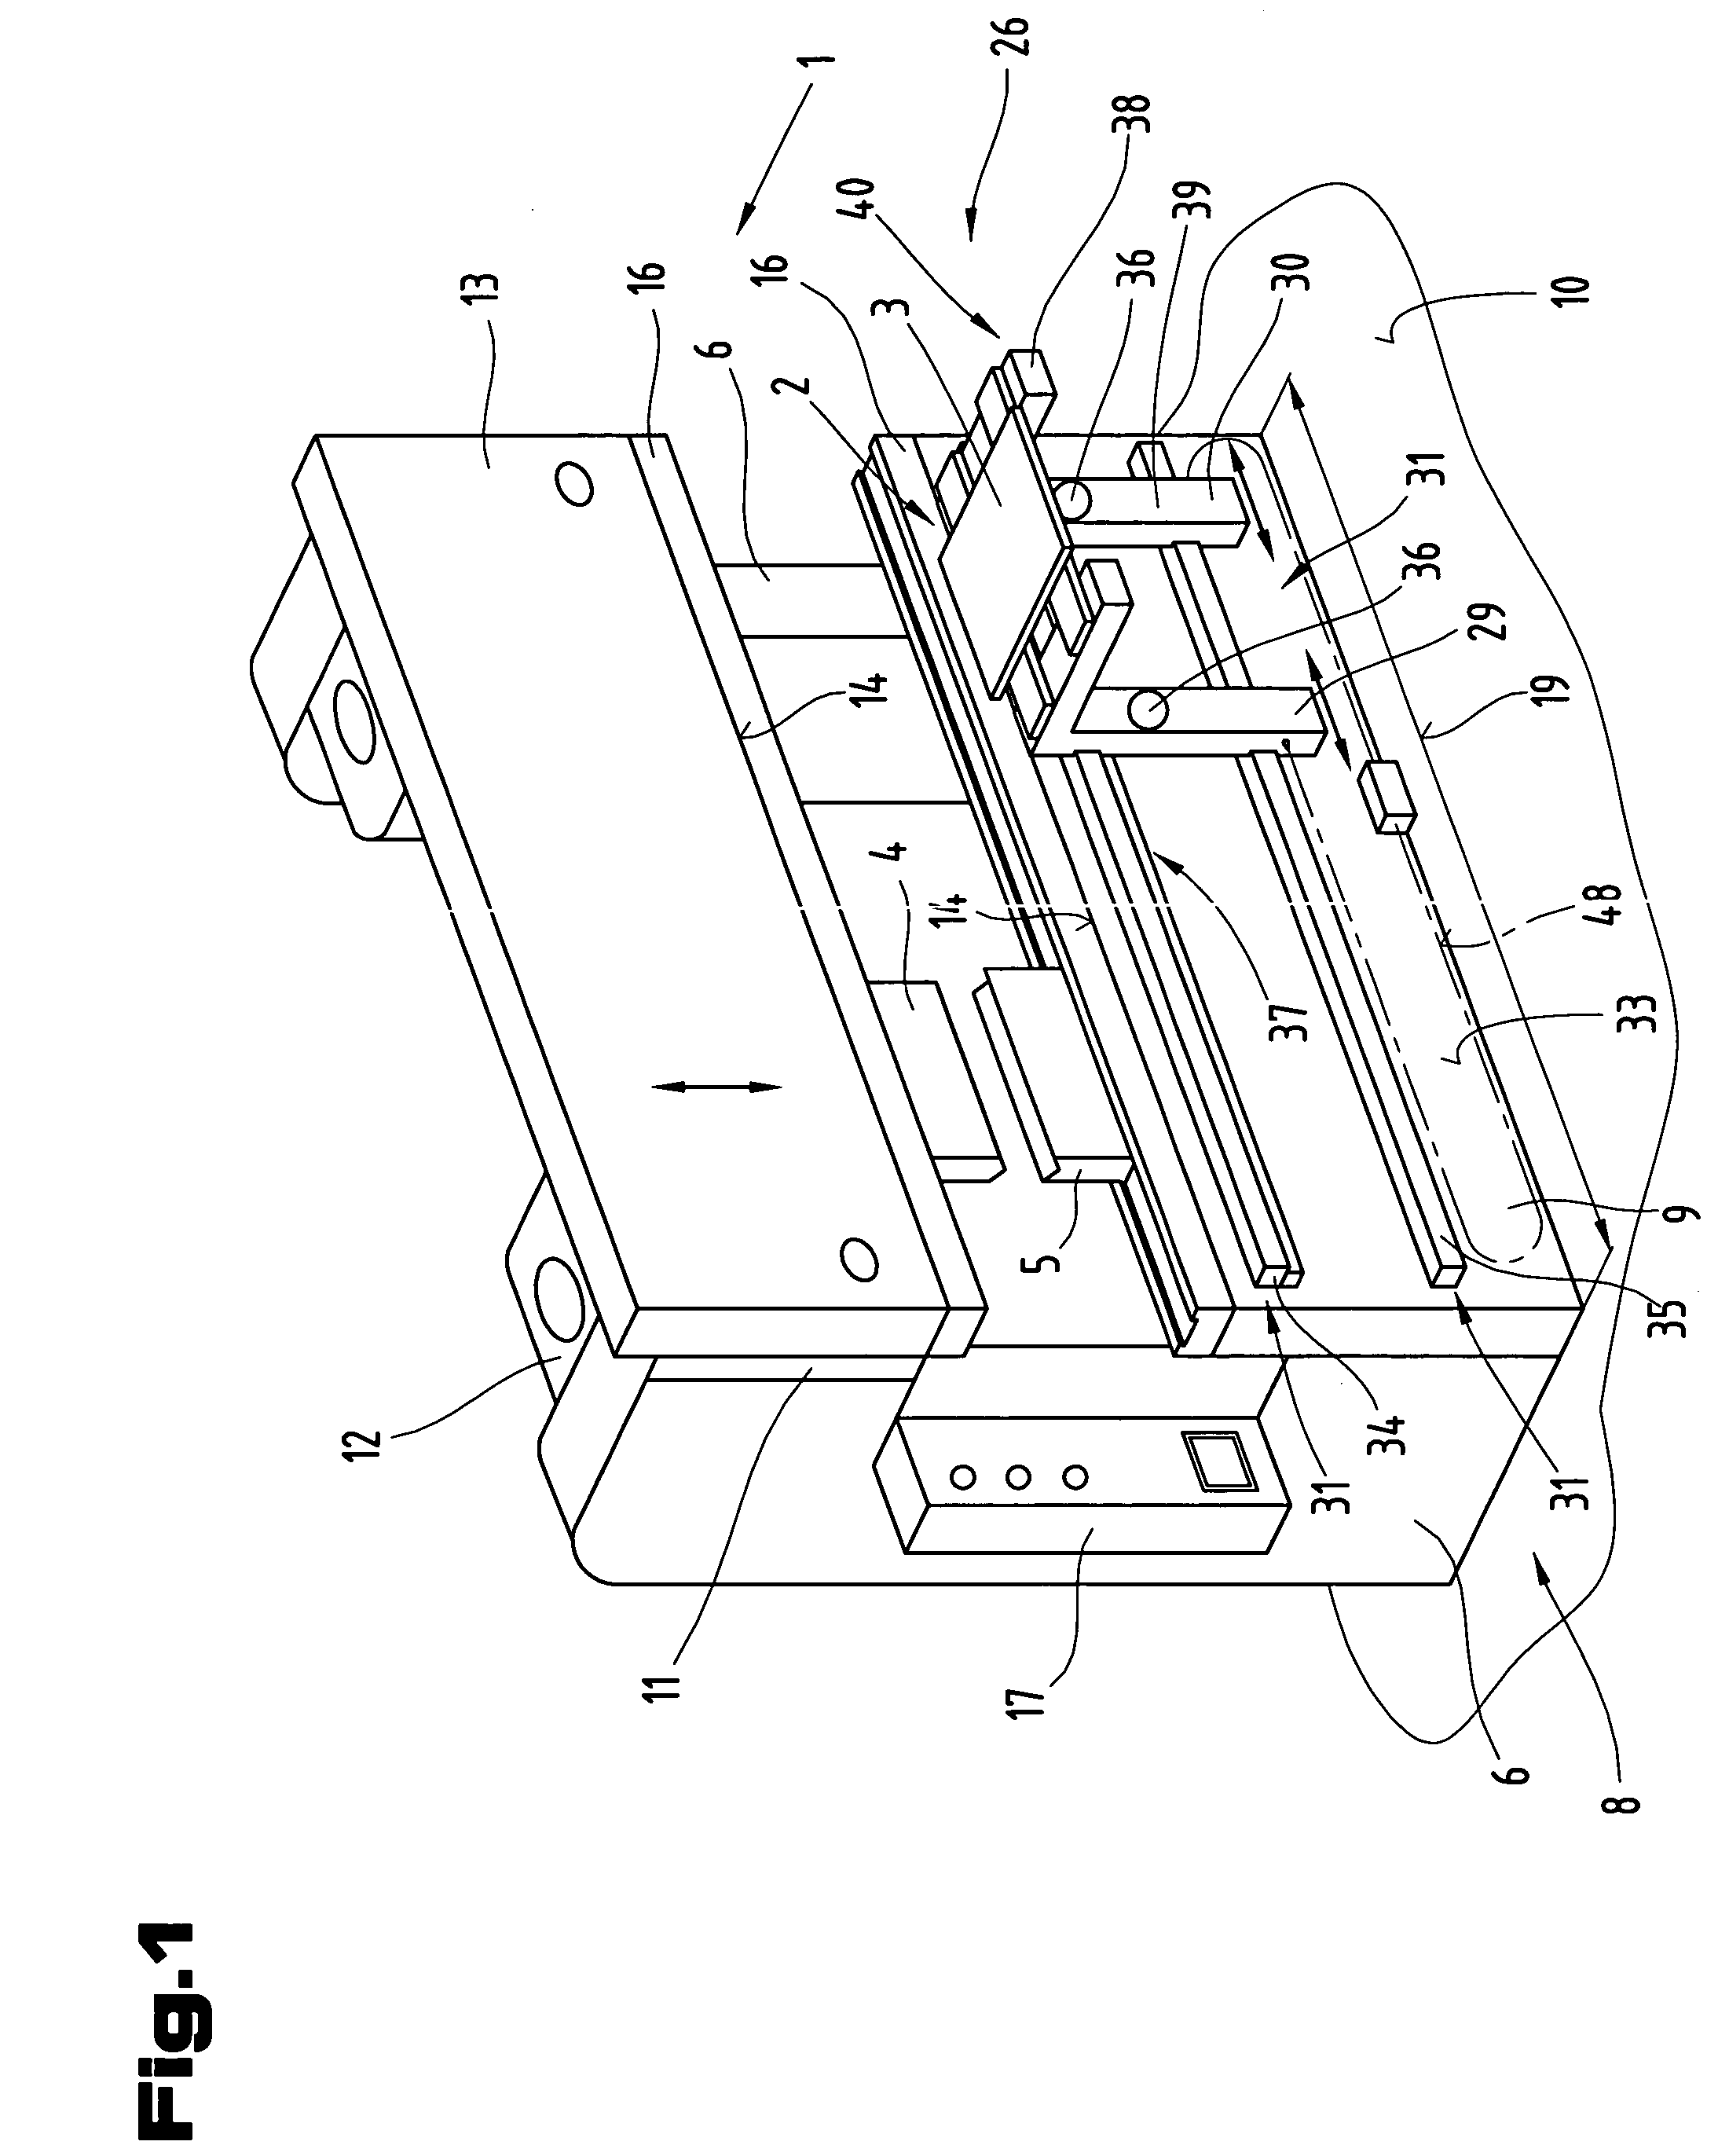 Metal sheet folding device with depositing/positioning device